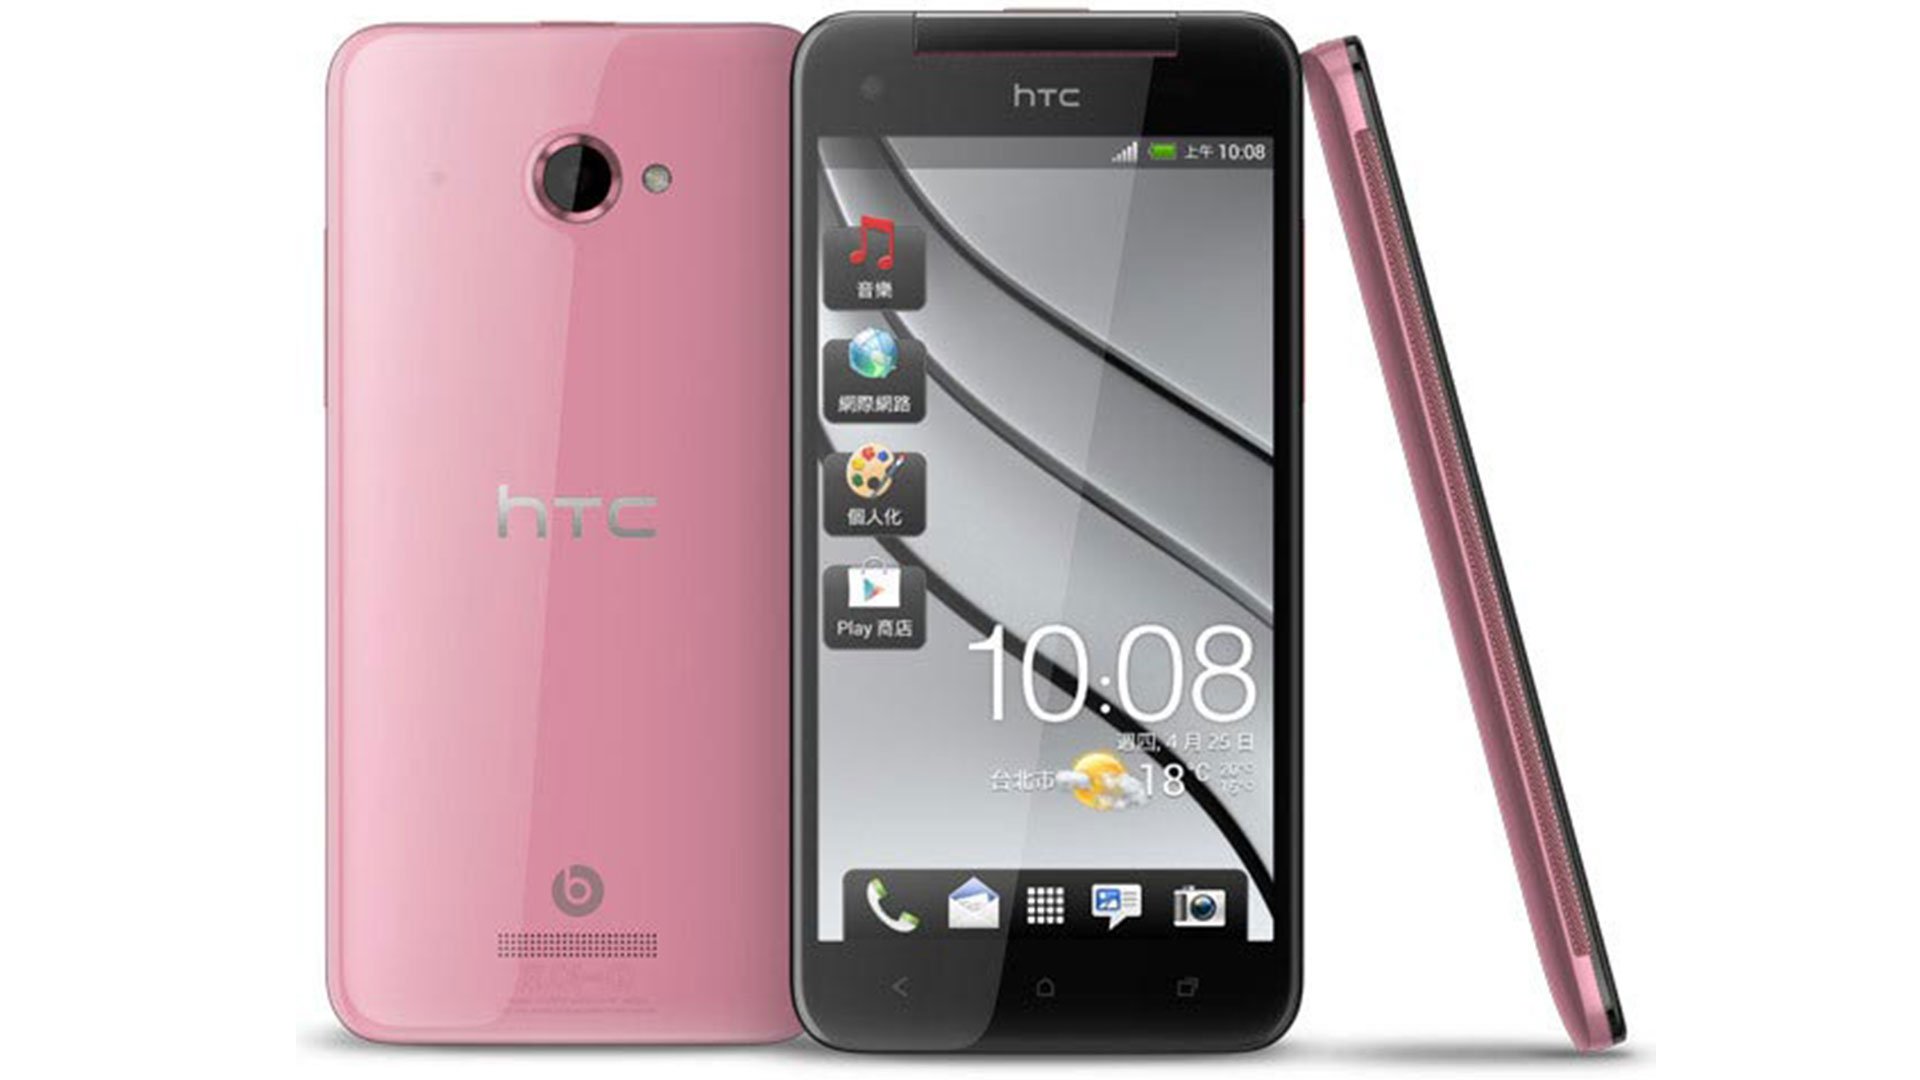 HTC Butterfly S specs, review, release date - PhonesData